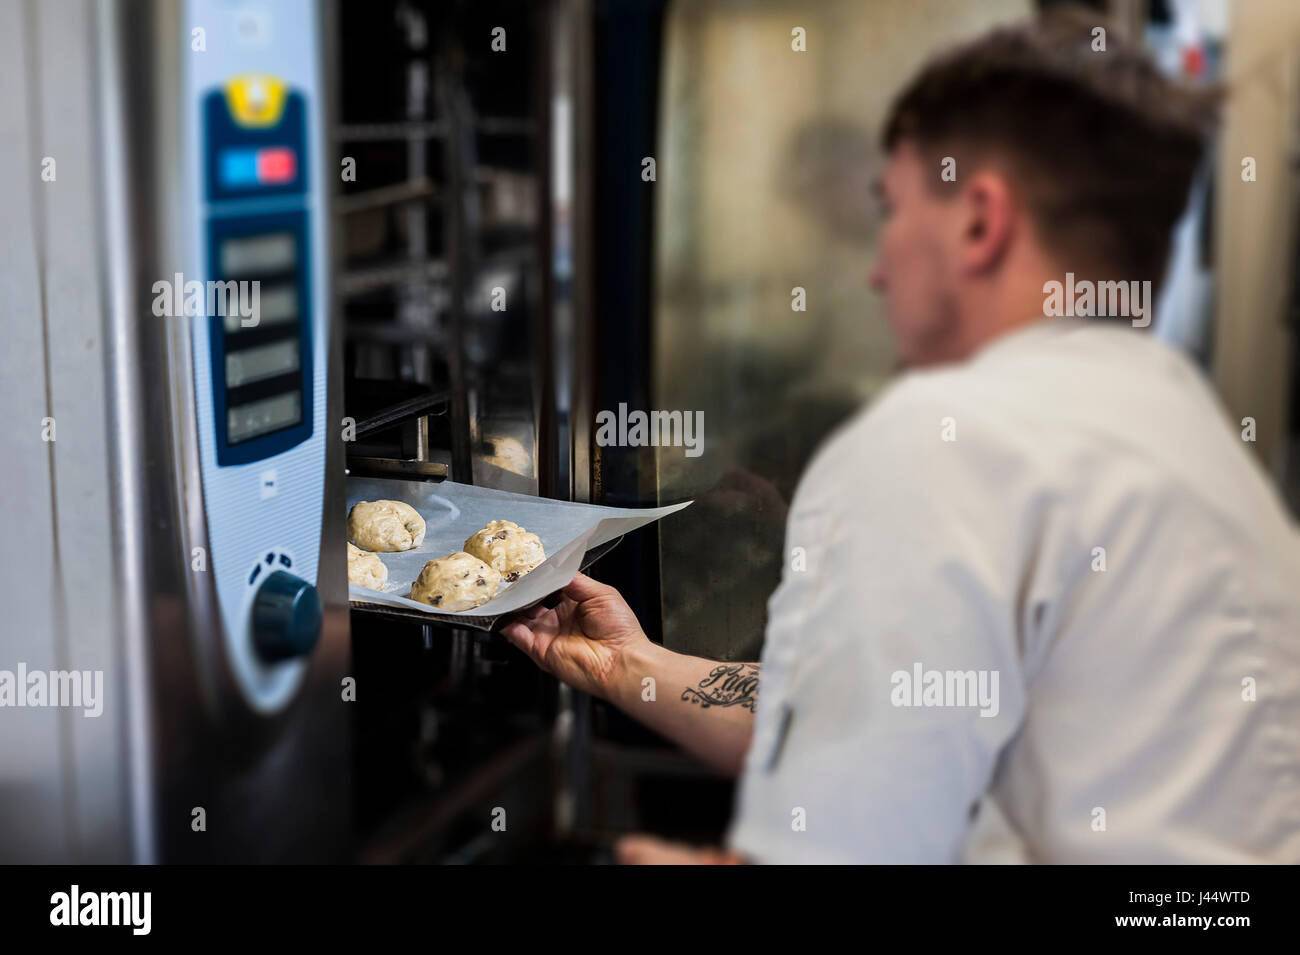 A chef puts a tray of scones into an oven; Kitchen; Food; Cooking; Baking; Restaurant; Food preparation; Food service industry; Worker; Working; Pract Stock Photo